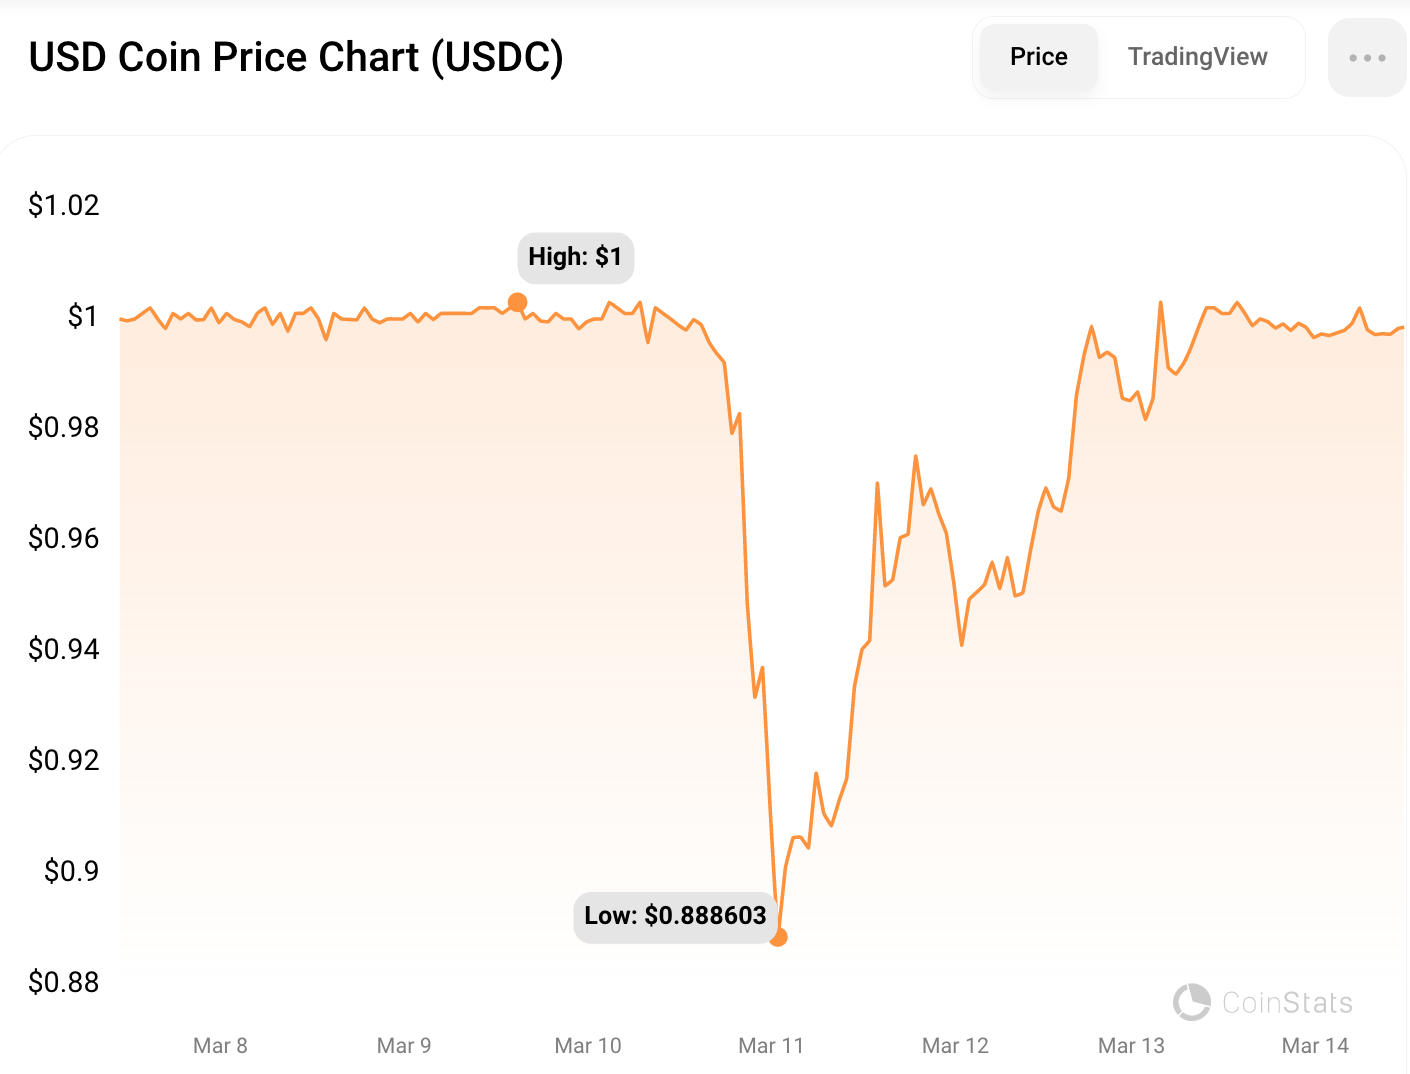 USDC Price Chart from https://coinstats.app/coins/usd-coin/